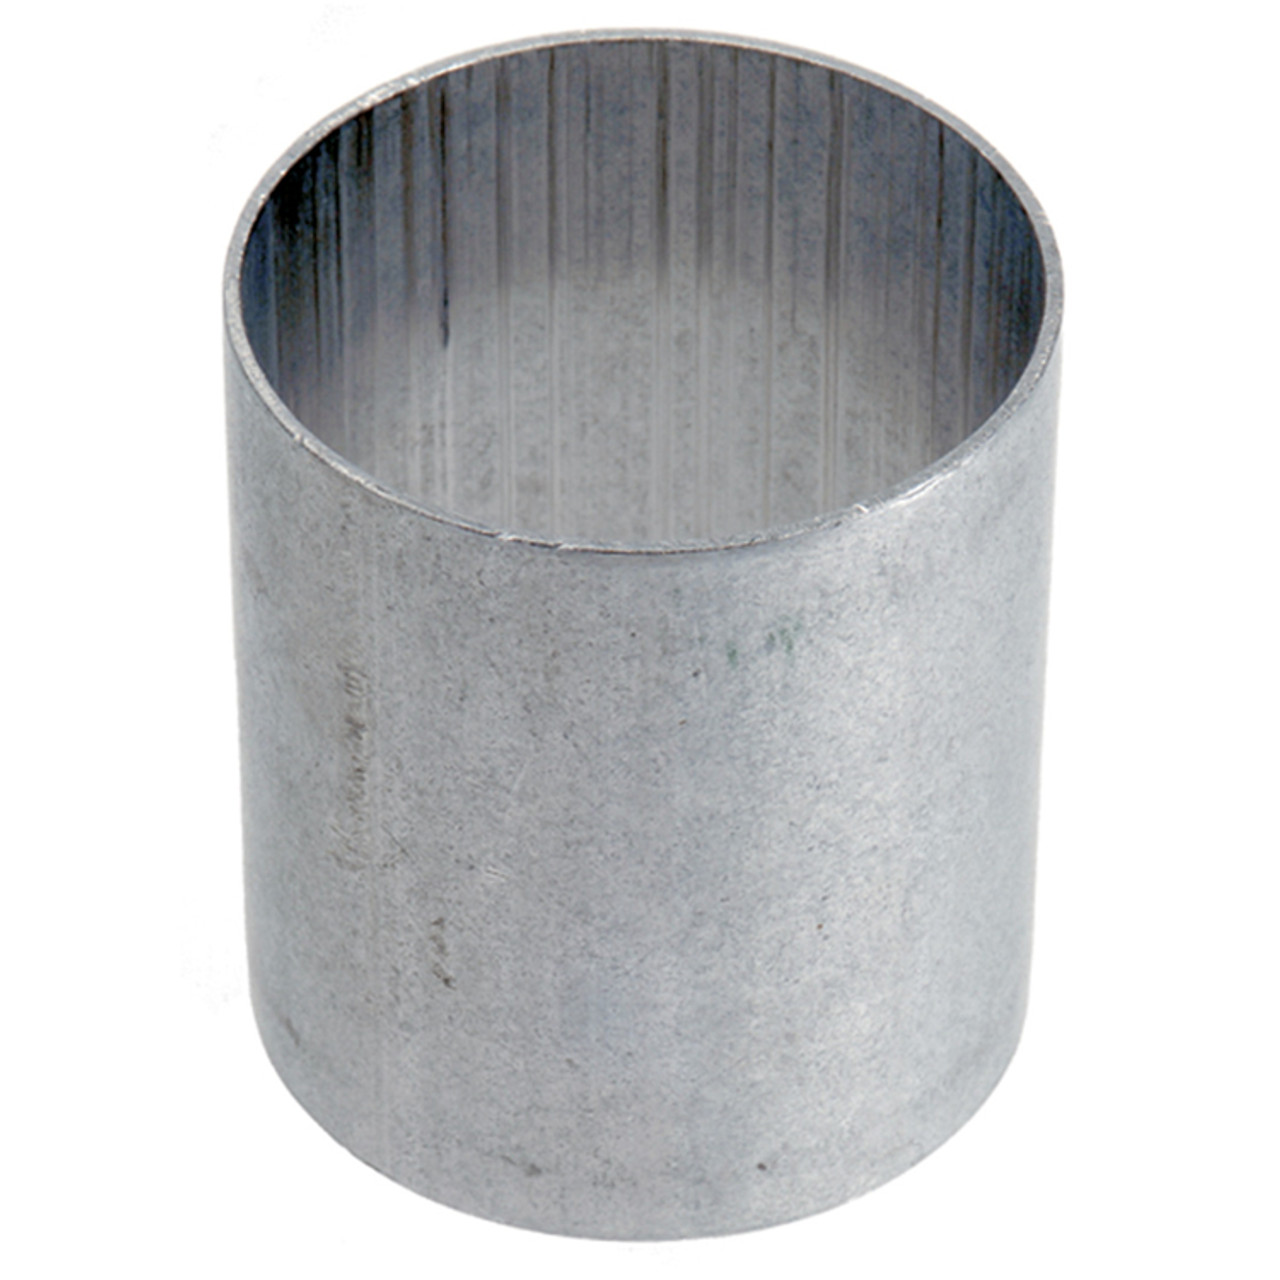 1.63" Stainless Steel Hose Sleeve   G3SS-163